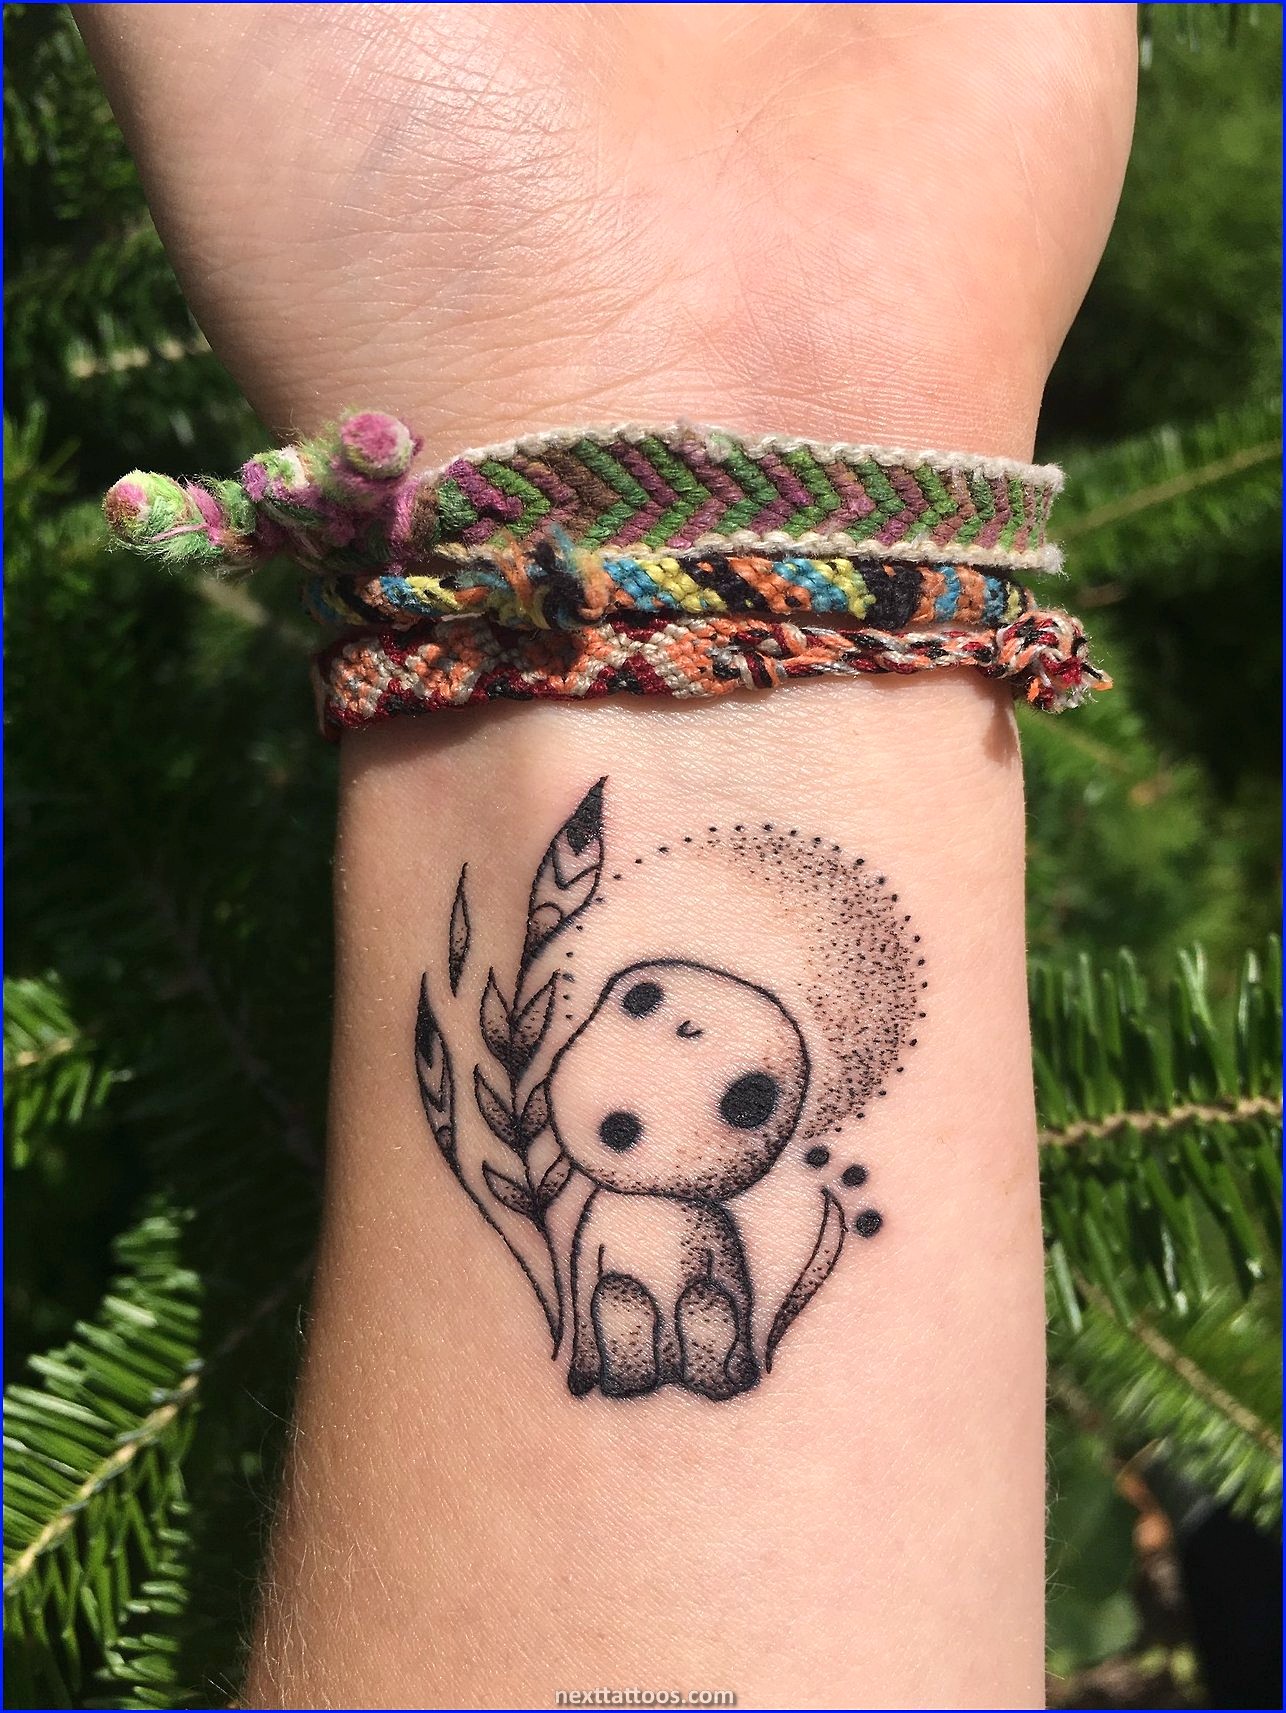 Small Nature Tattoos - Inspiration From Nature